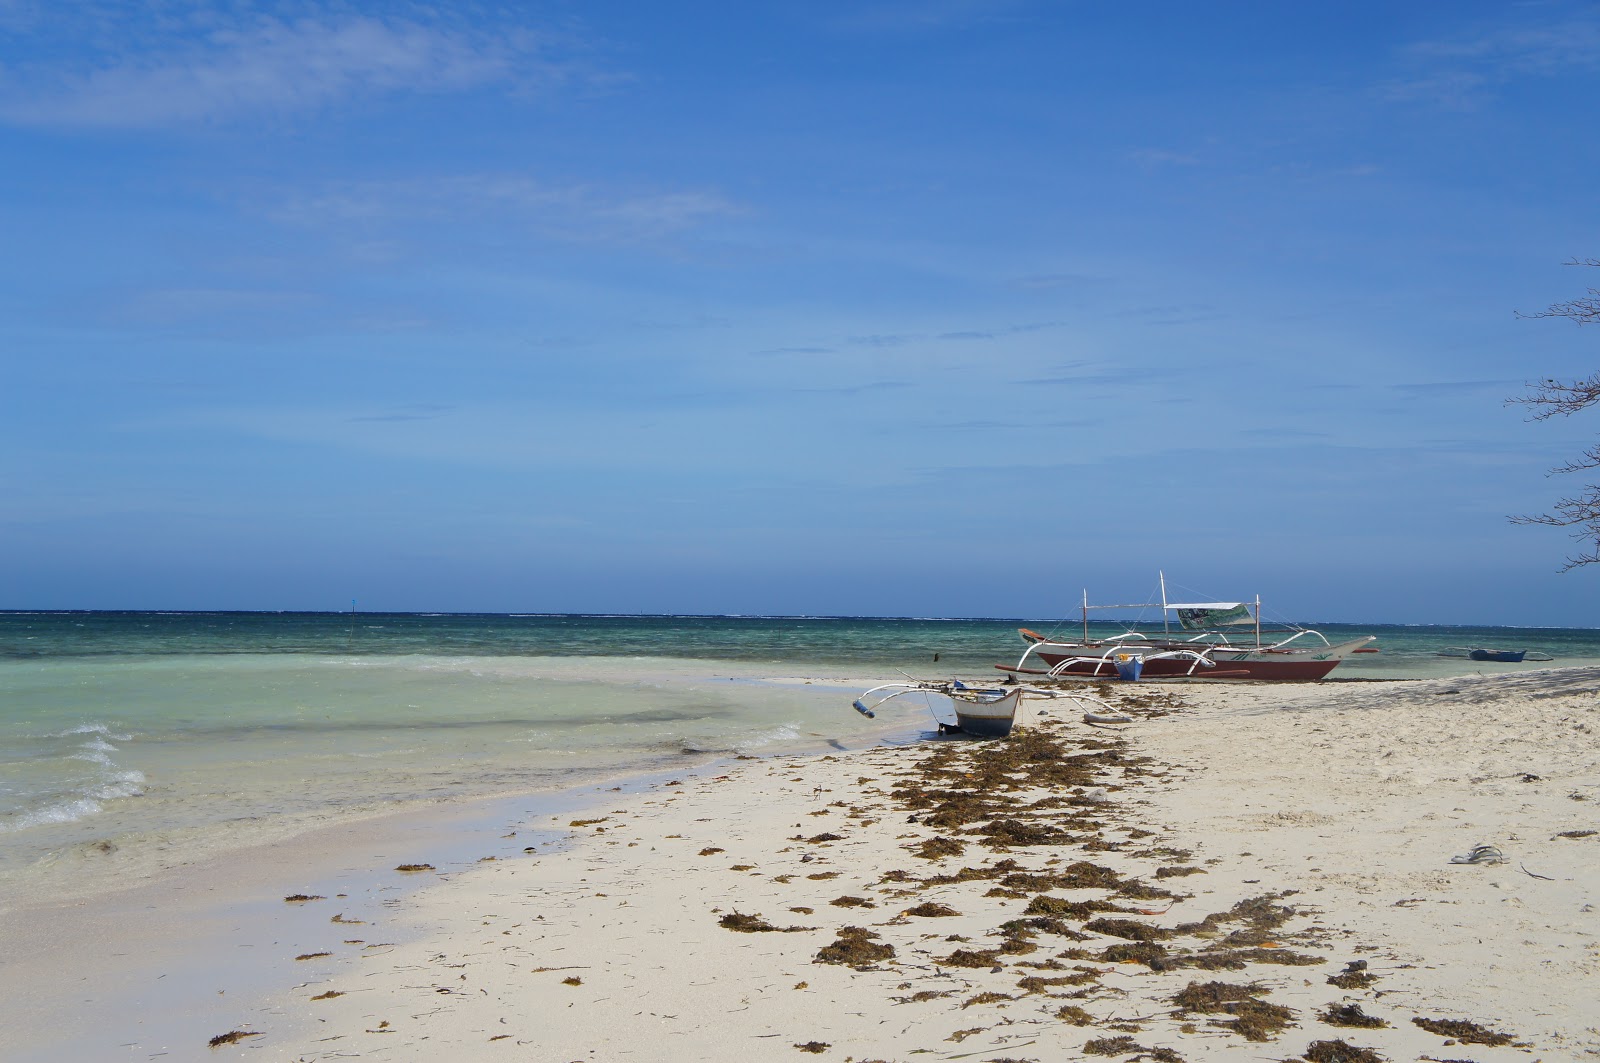 Honda Bay Island Hopping Tour: Things To Do in Palawan, Philippines